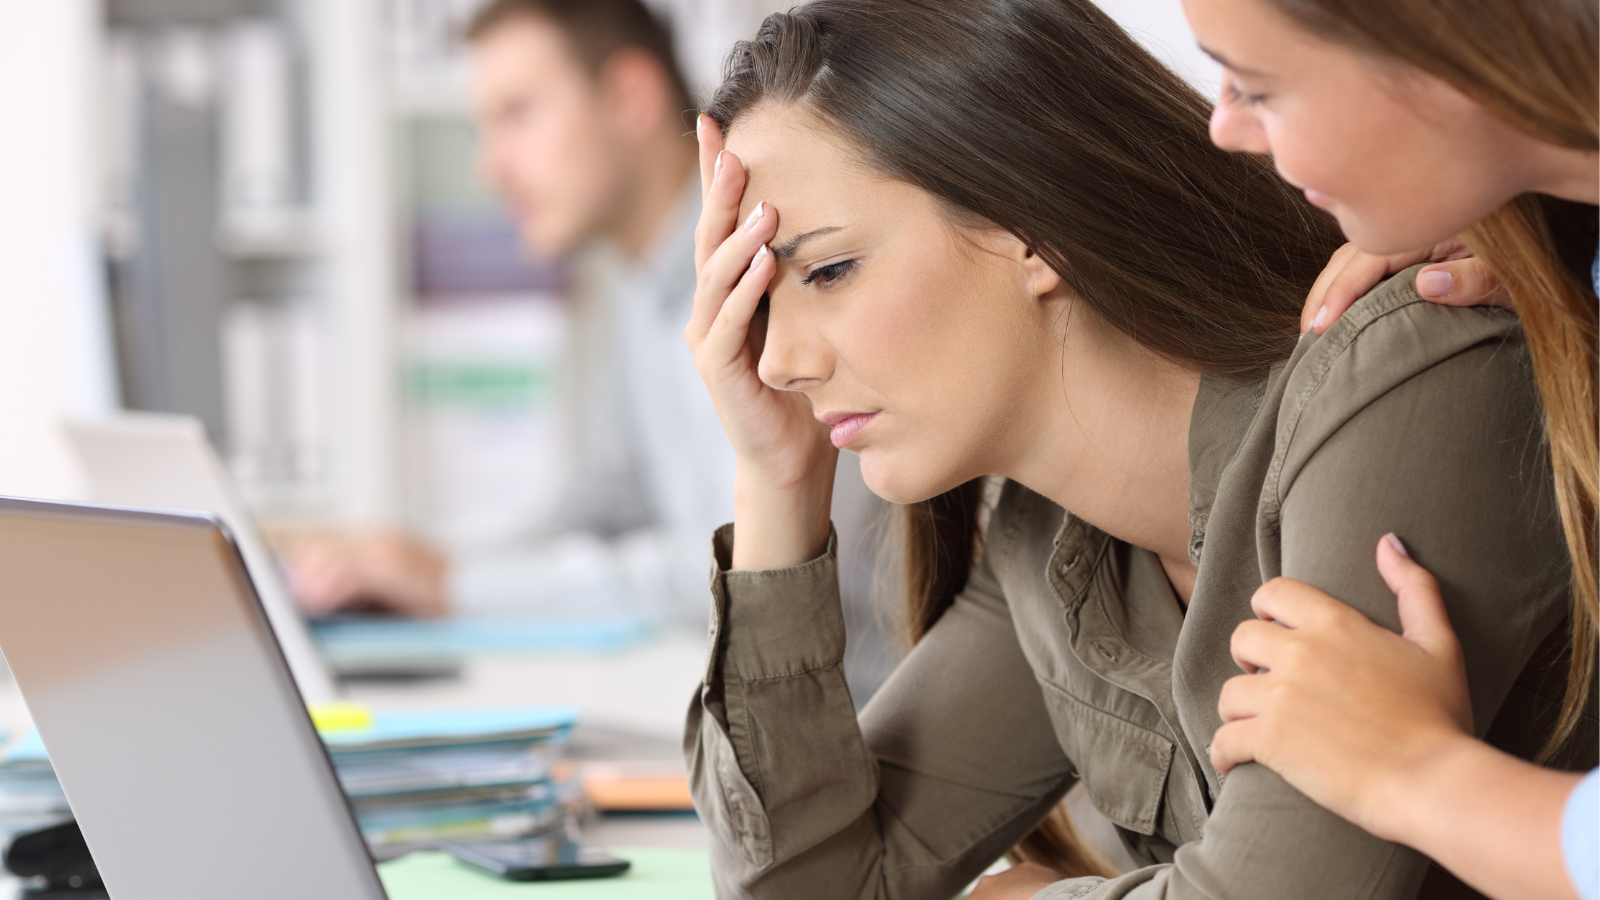 How to Spot Disengaged Employees and Turn Them Around